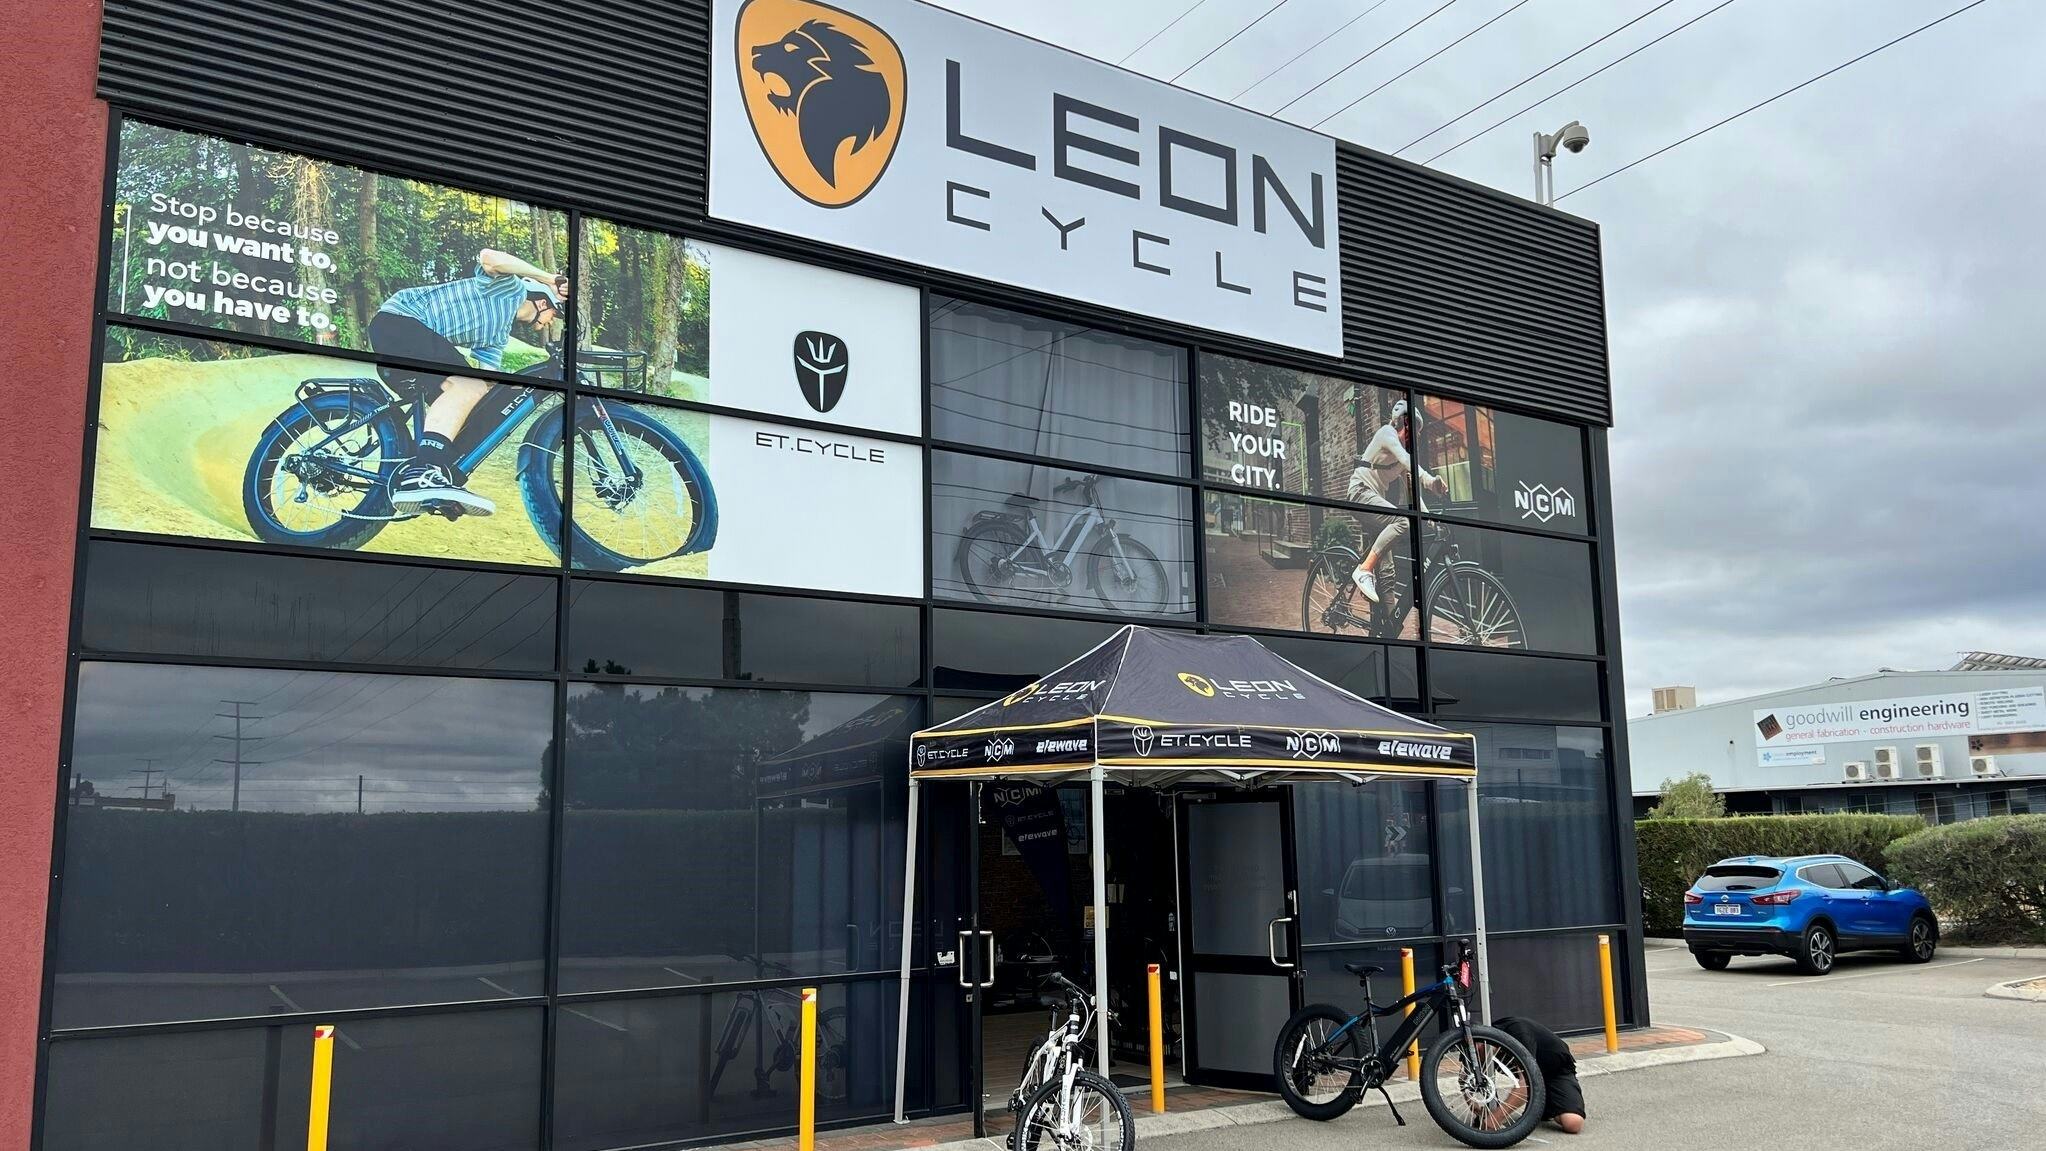 Leon Cycle owner Lijun D. has been imprisoned for major fraud to evade the European Union's Trade Defense Instruments. – Photo Bike Europe